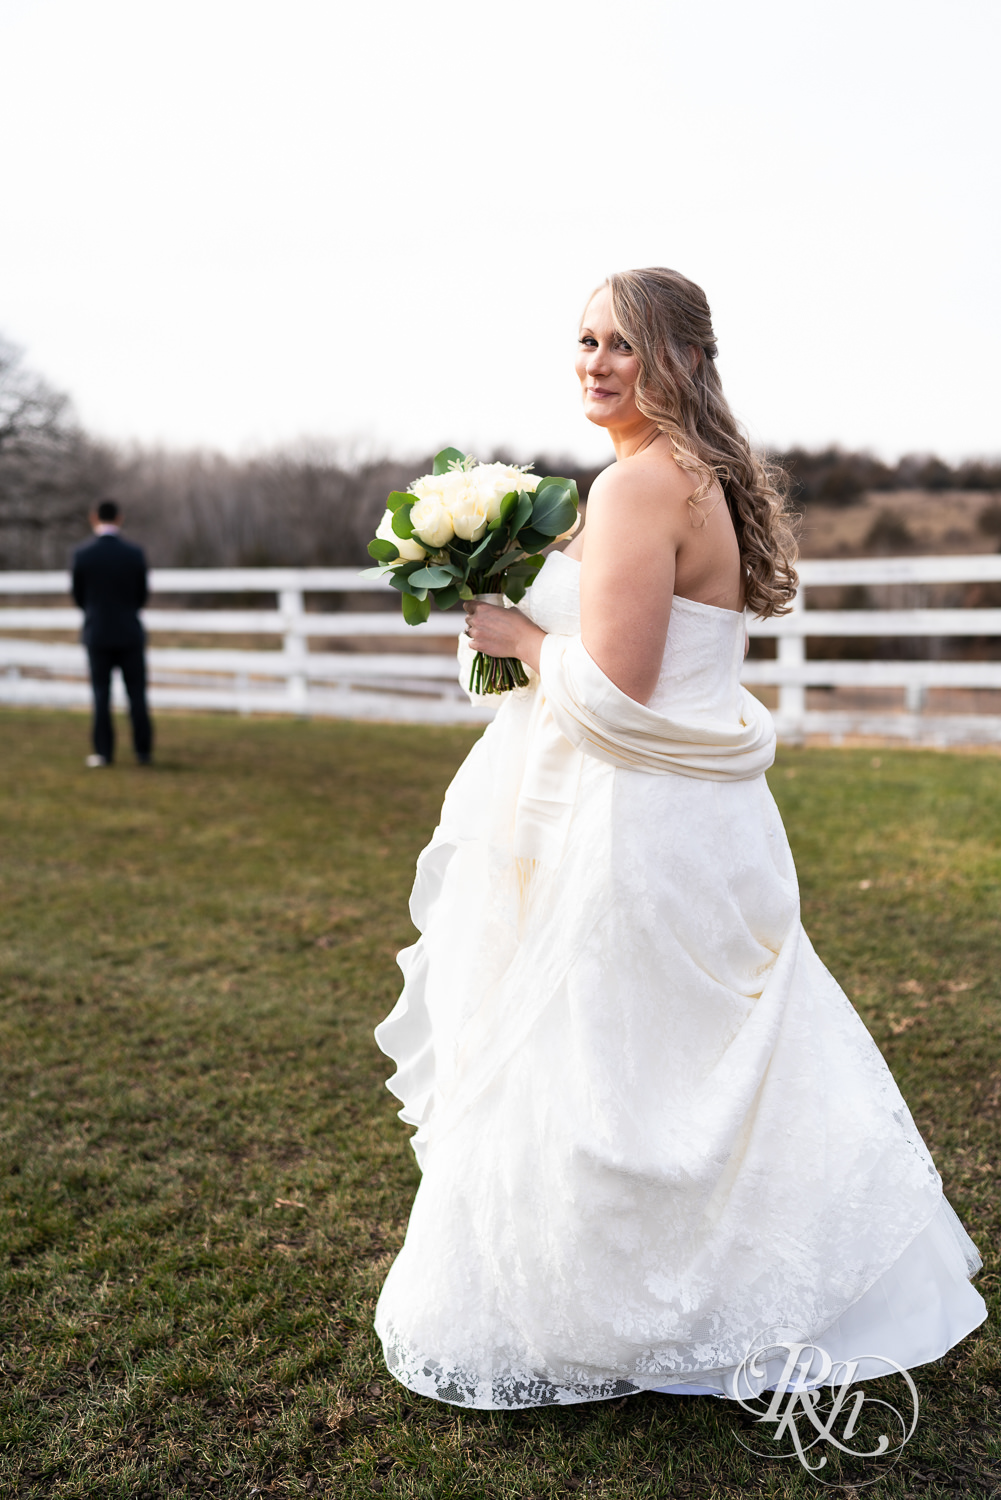 Bride and groom share first look on wedding day at Almquist Farm in Hastings, Minnesota.